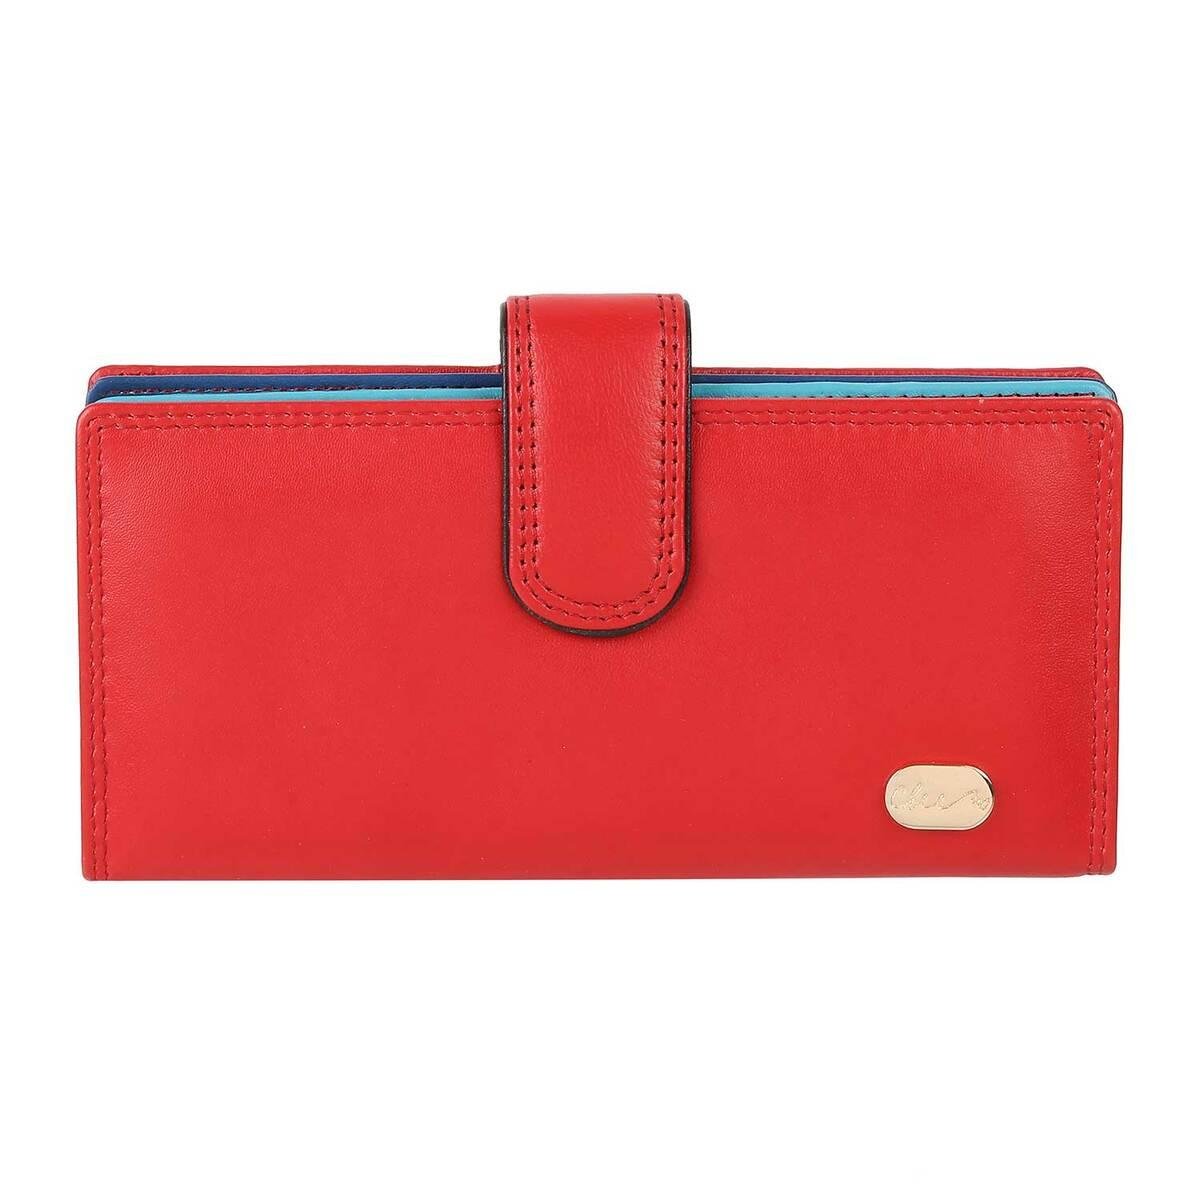 Gift Chic Red Purse By Badgley Mischka- FNP